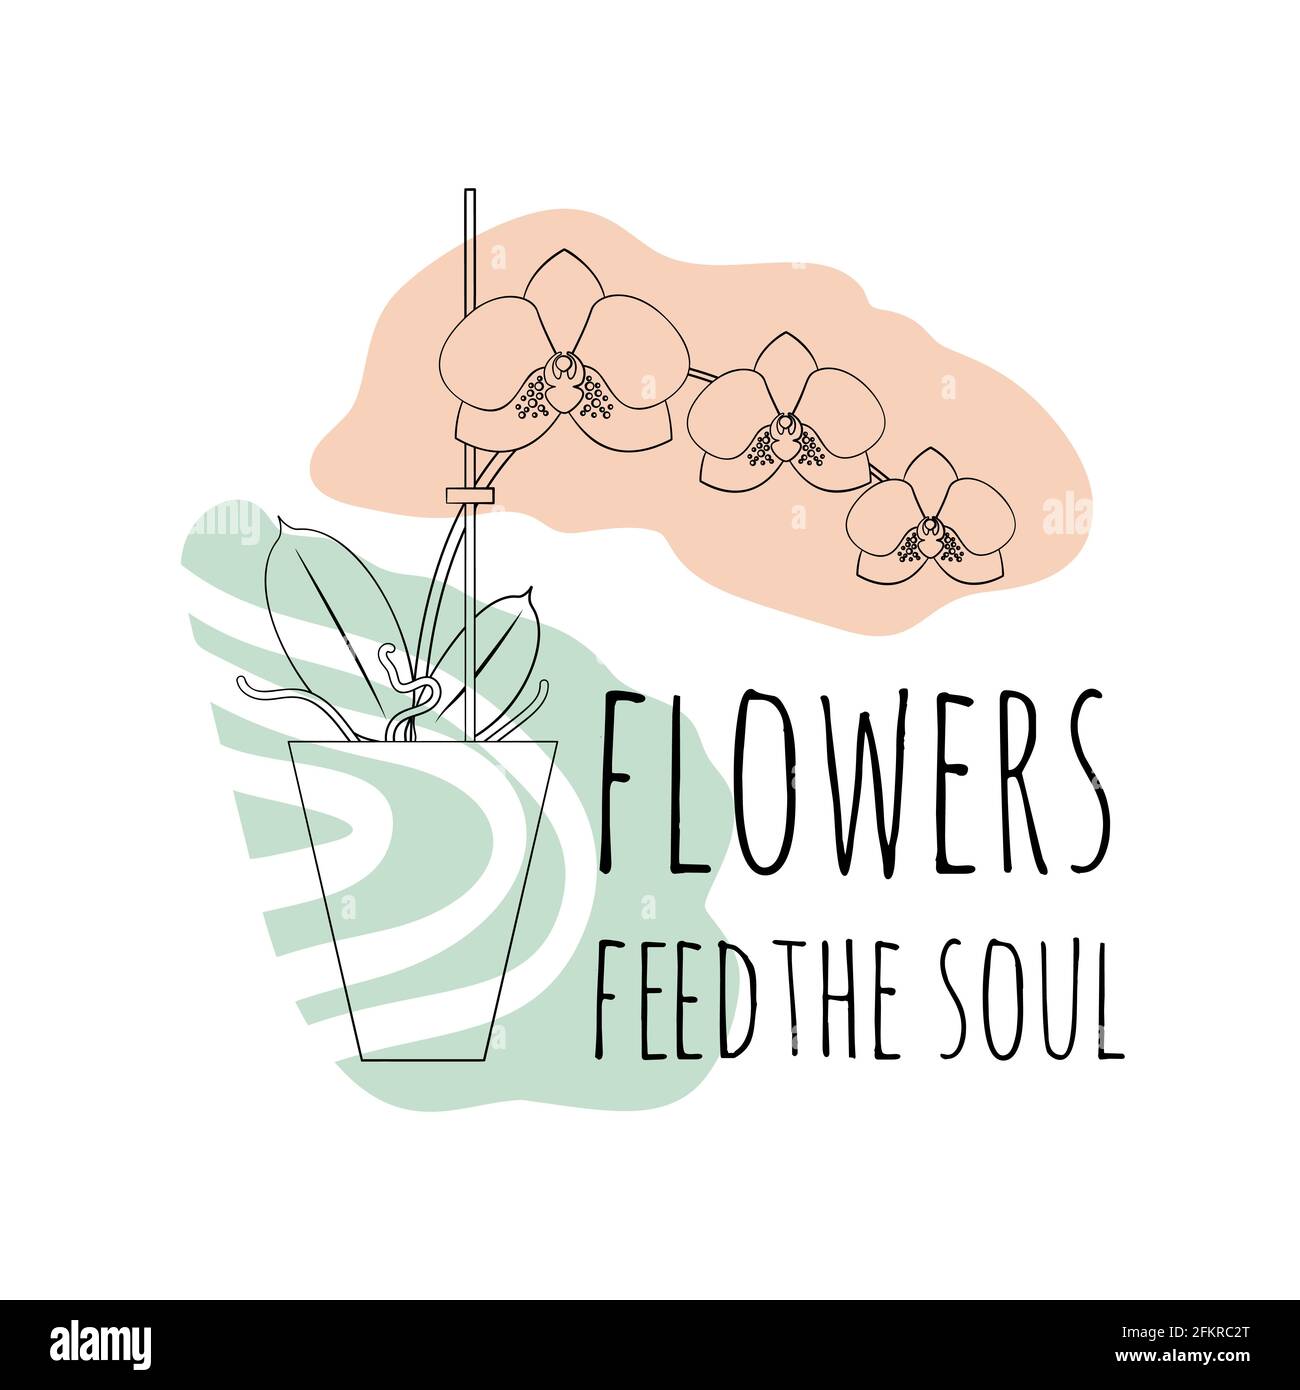 Minimalist boho illustration of quote flowers feed the soul with black line art potted house plant moth orchid and abstract shapes background Stock Vector